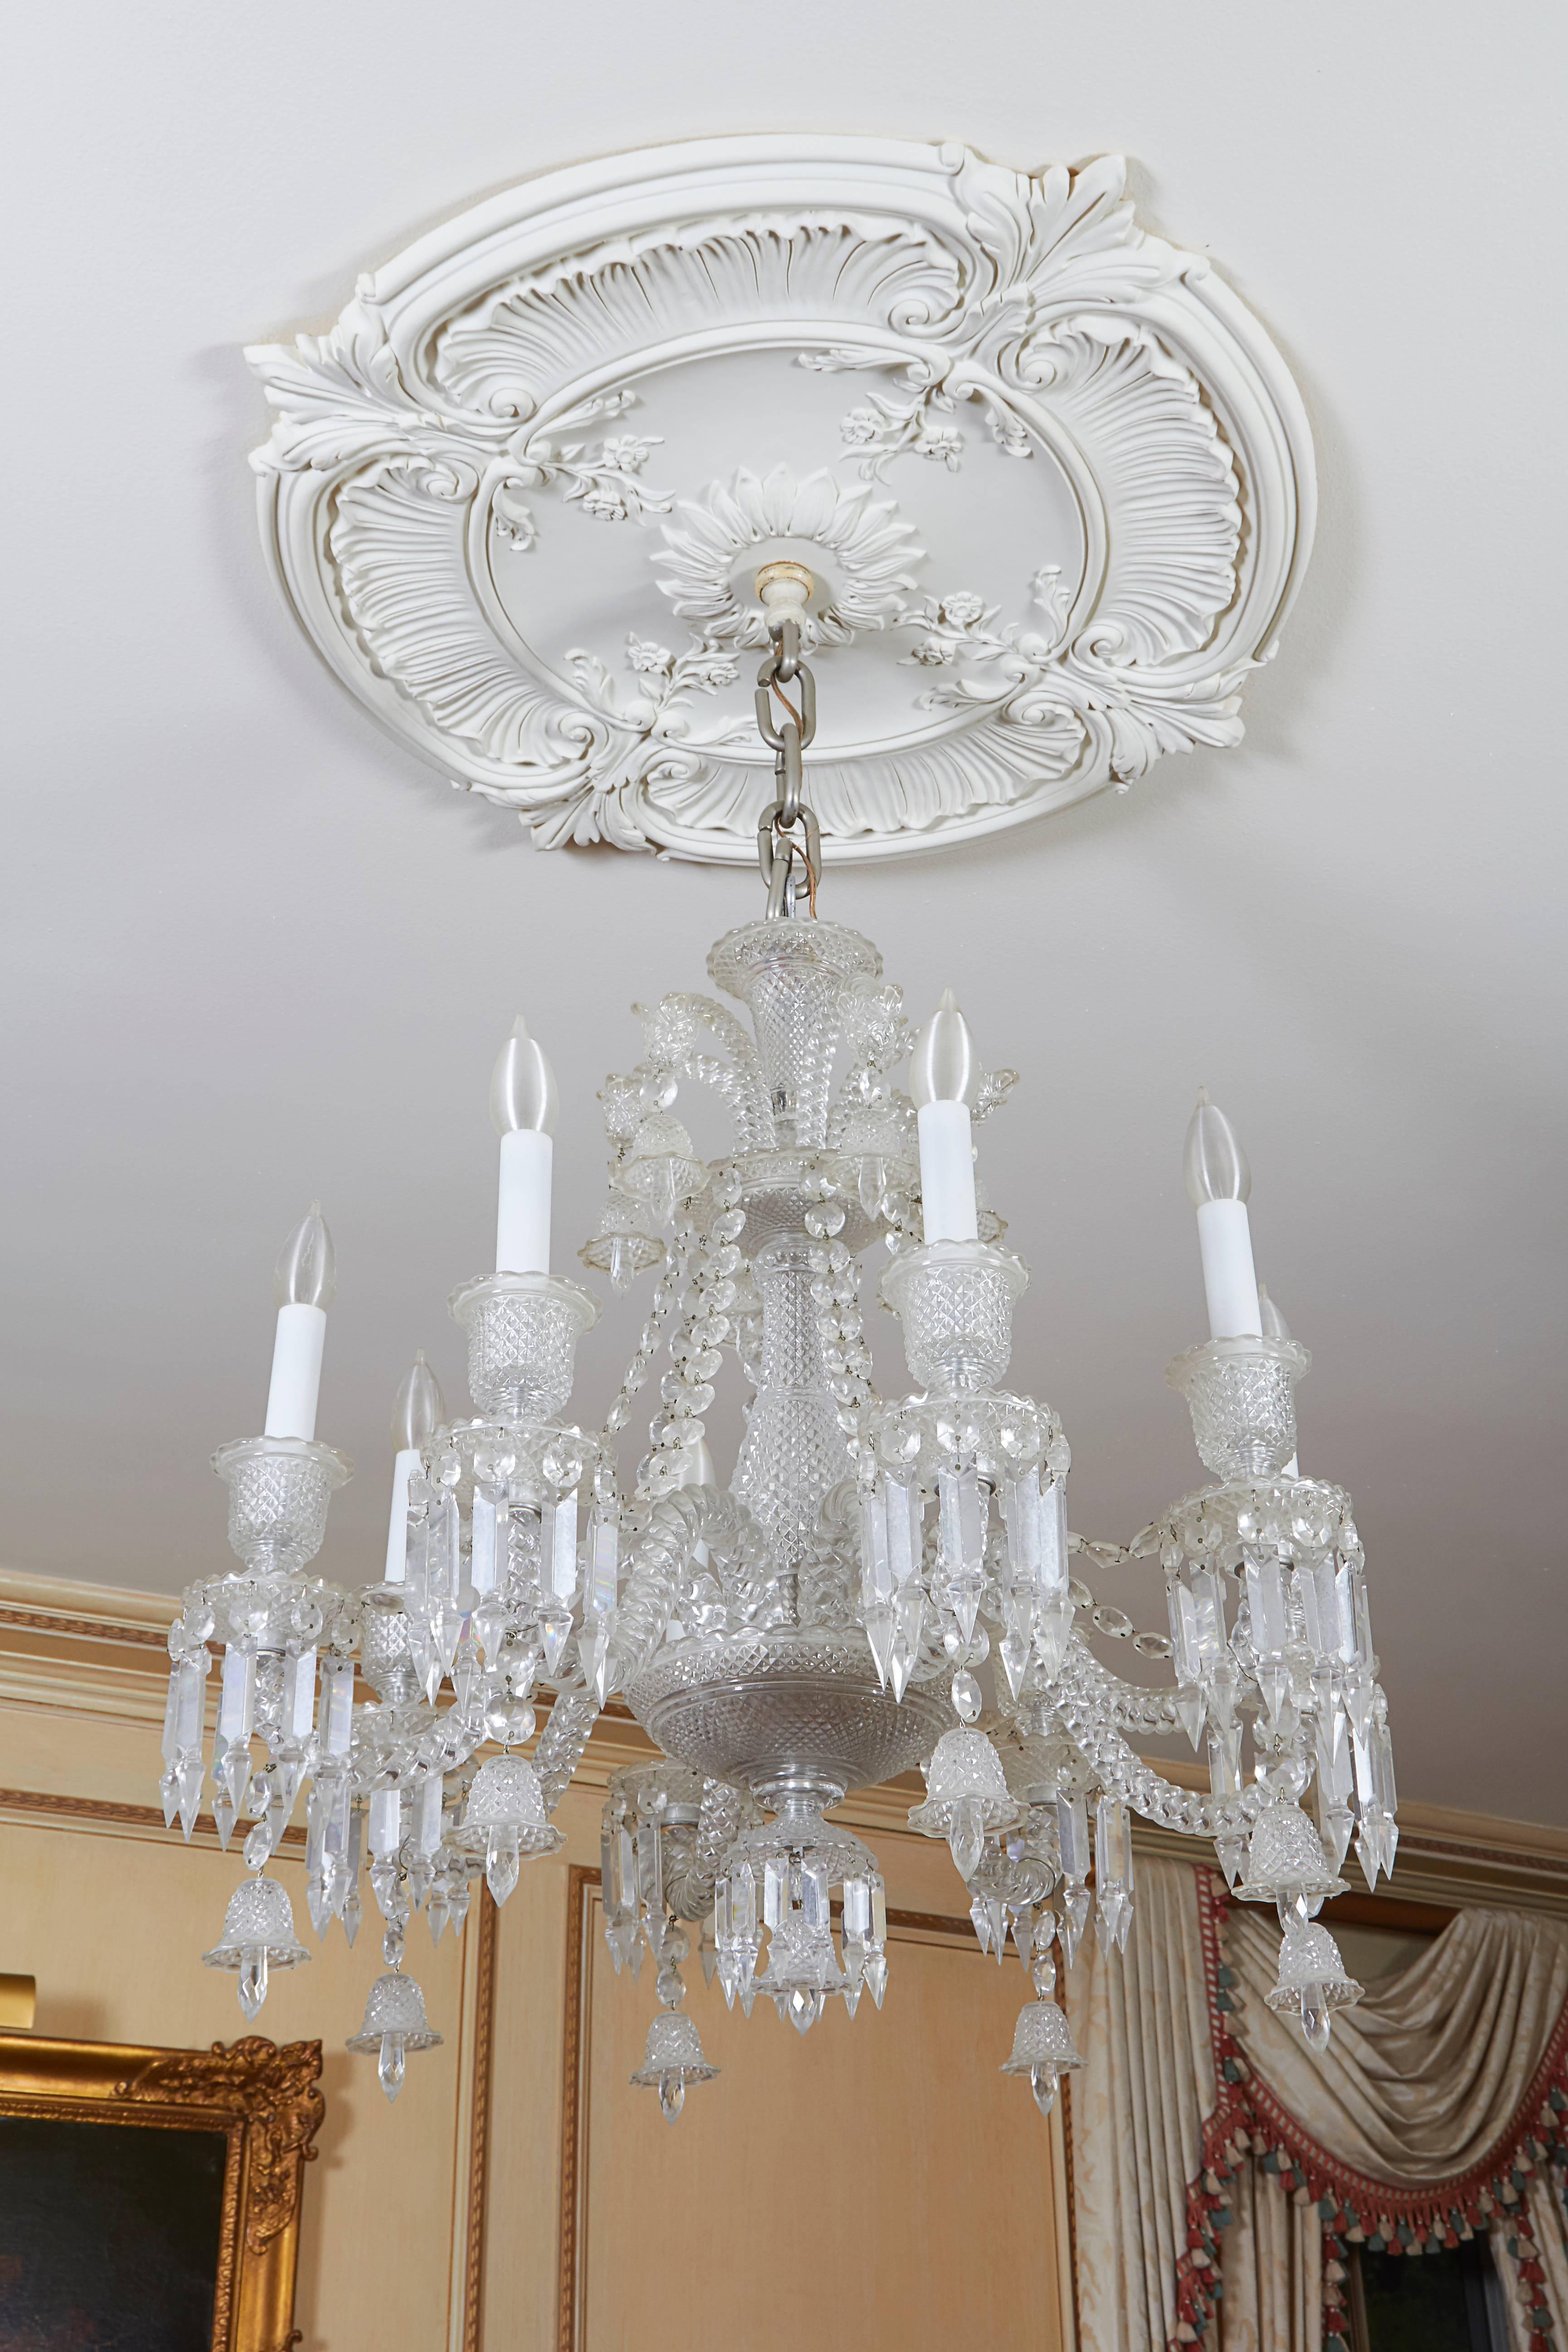 Scarce smaller scale version of Baccarat's Zenith model featuring diamond cut crystal and whimsical pendant bells.